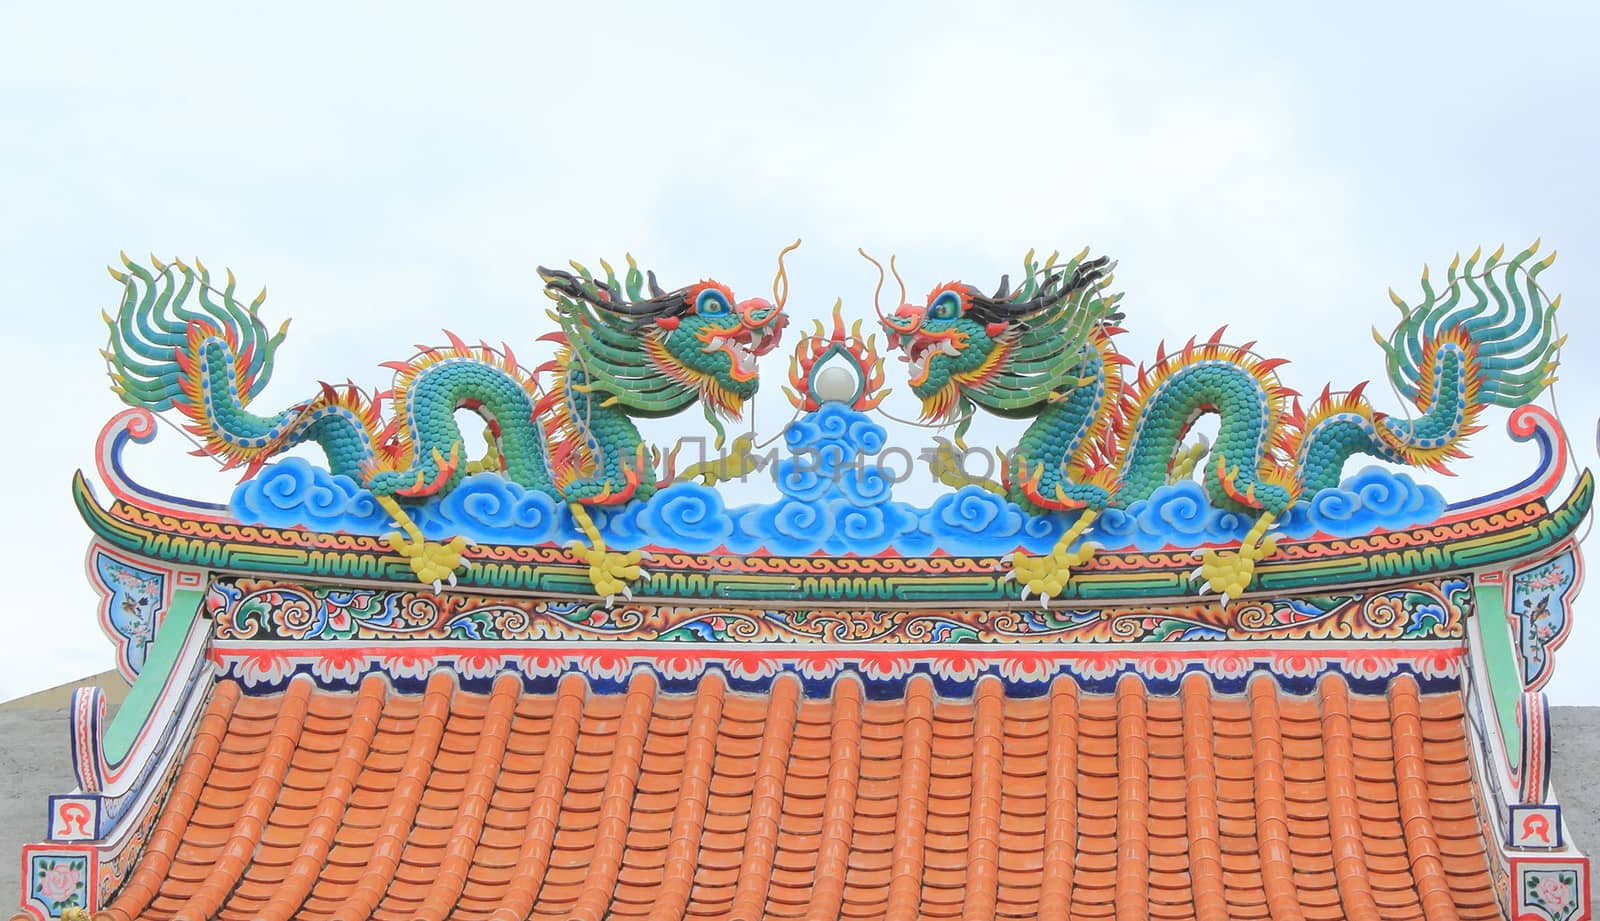 Chinese dragon at Chinese temple roof